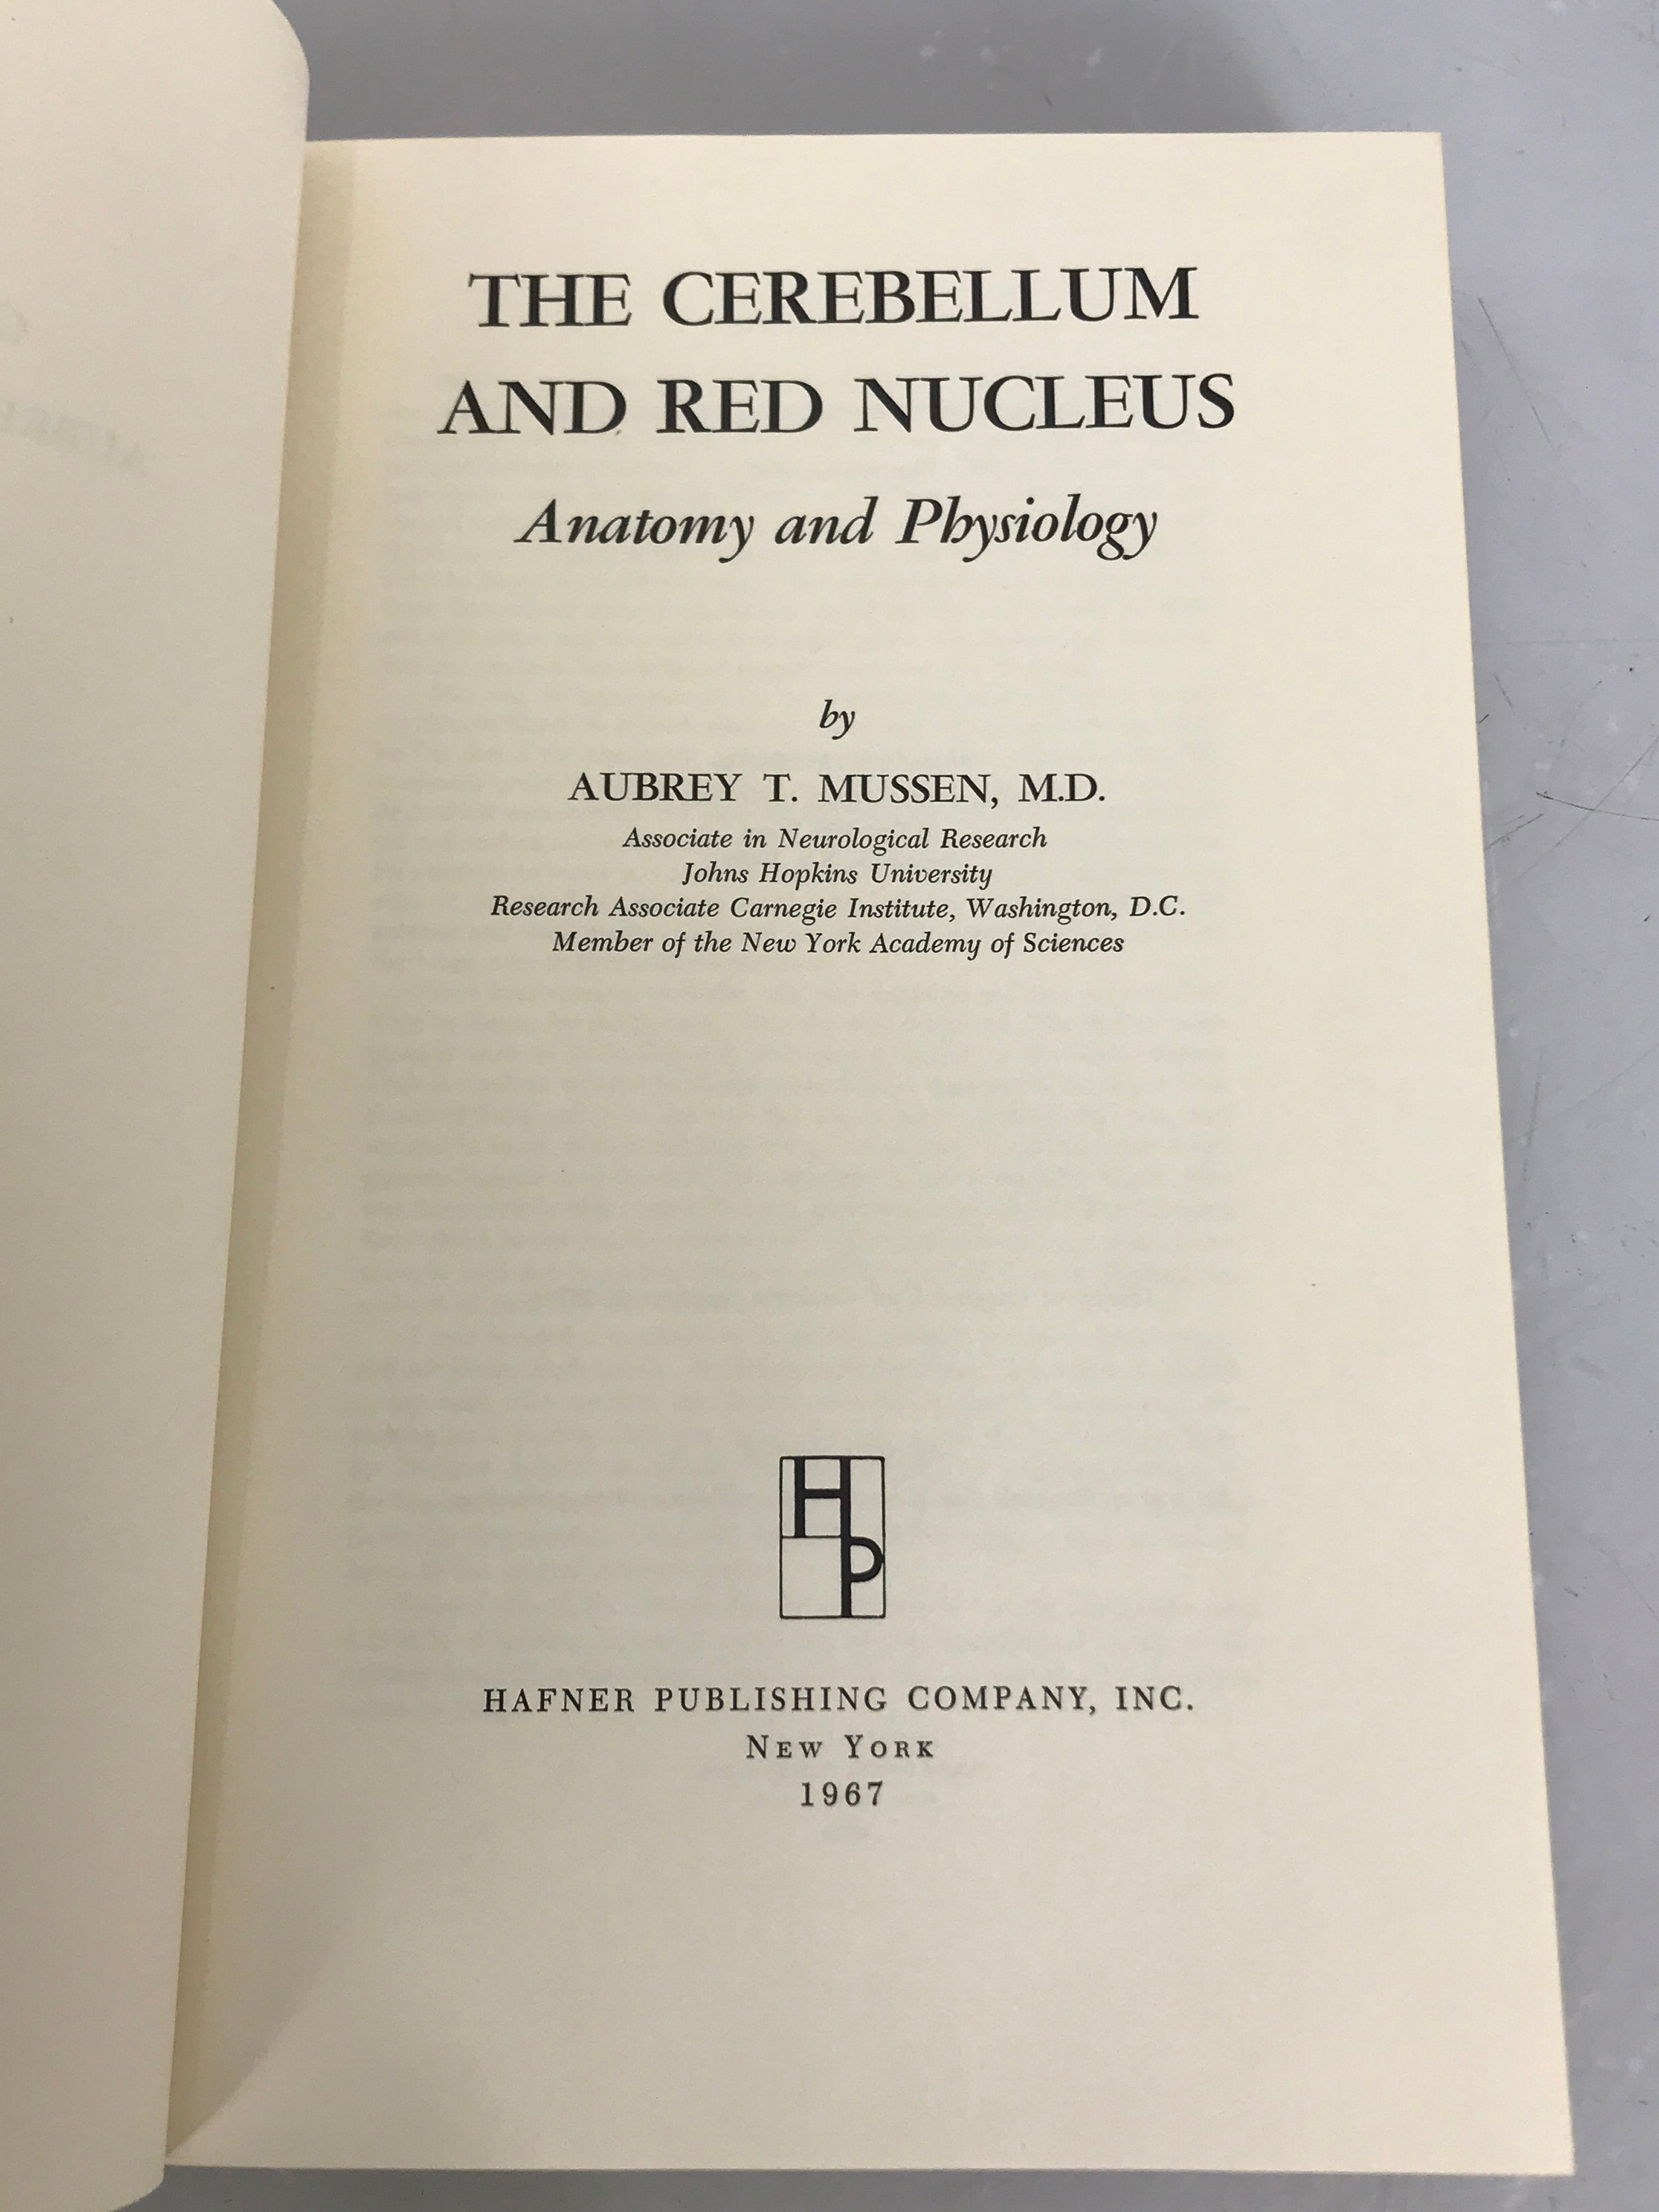 Lot of 2 Science of the Cerebellum Books: The Cerebellum and Red Nucleus (1967, First) and Problems in Cerebellar Physiology (1950) HC DJ